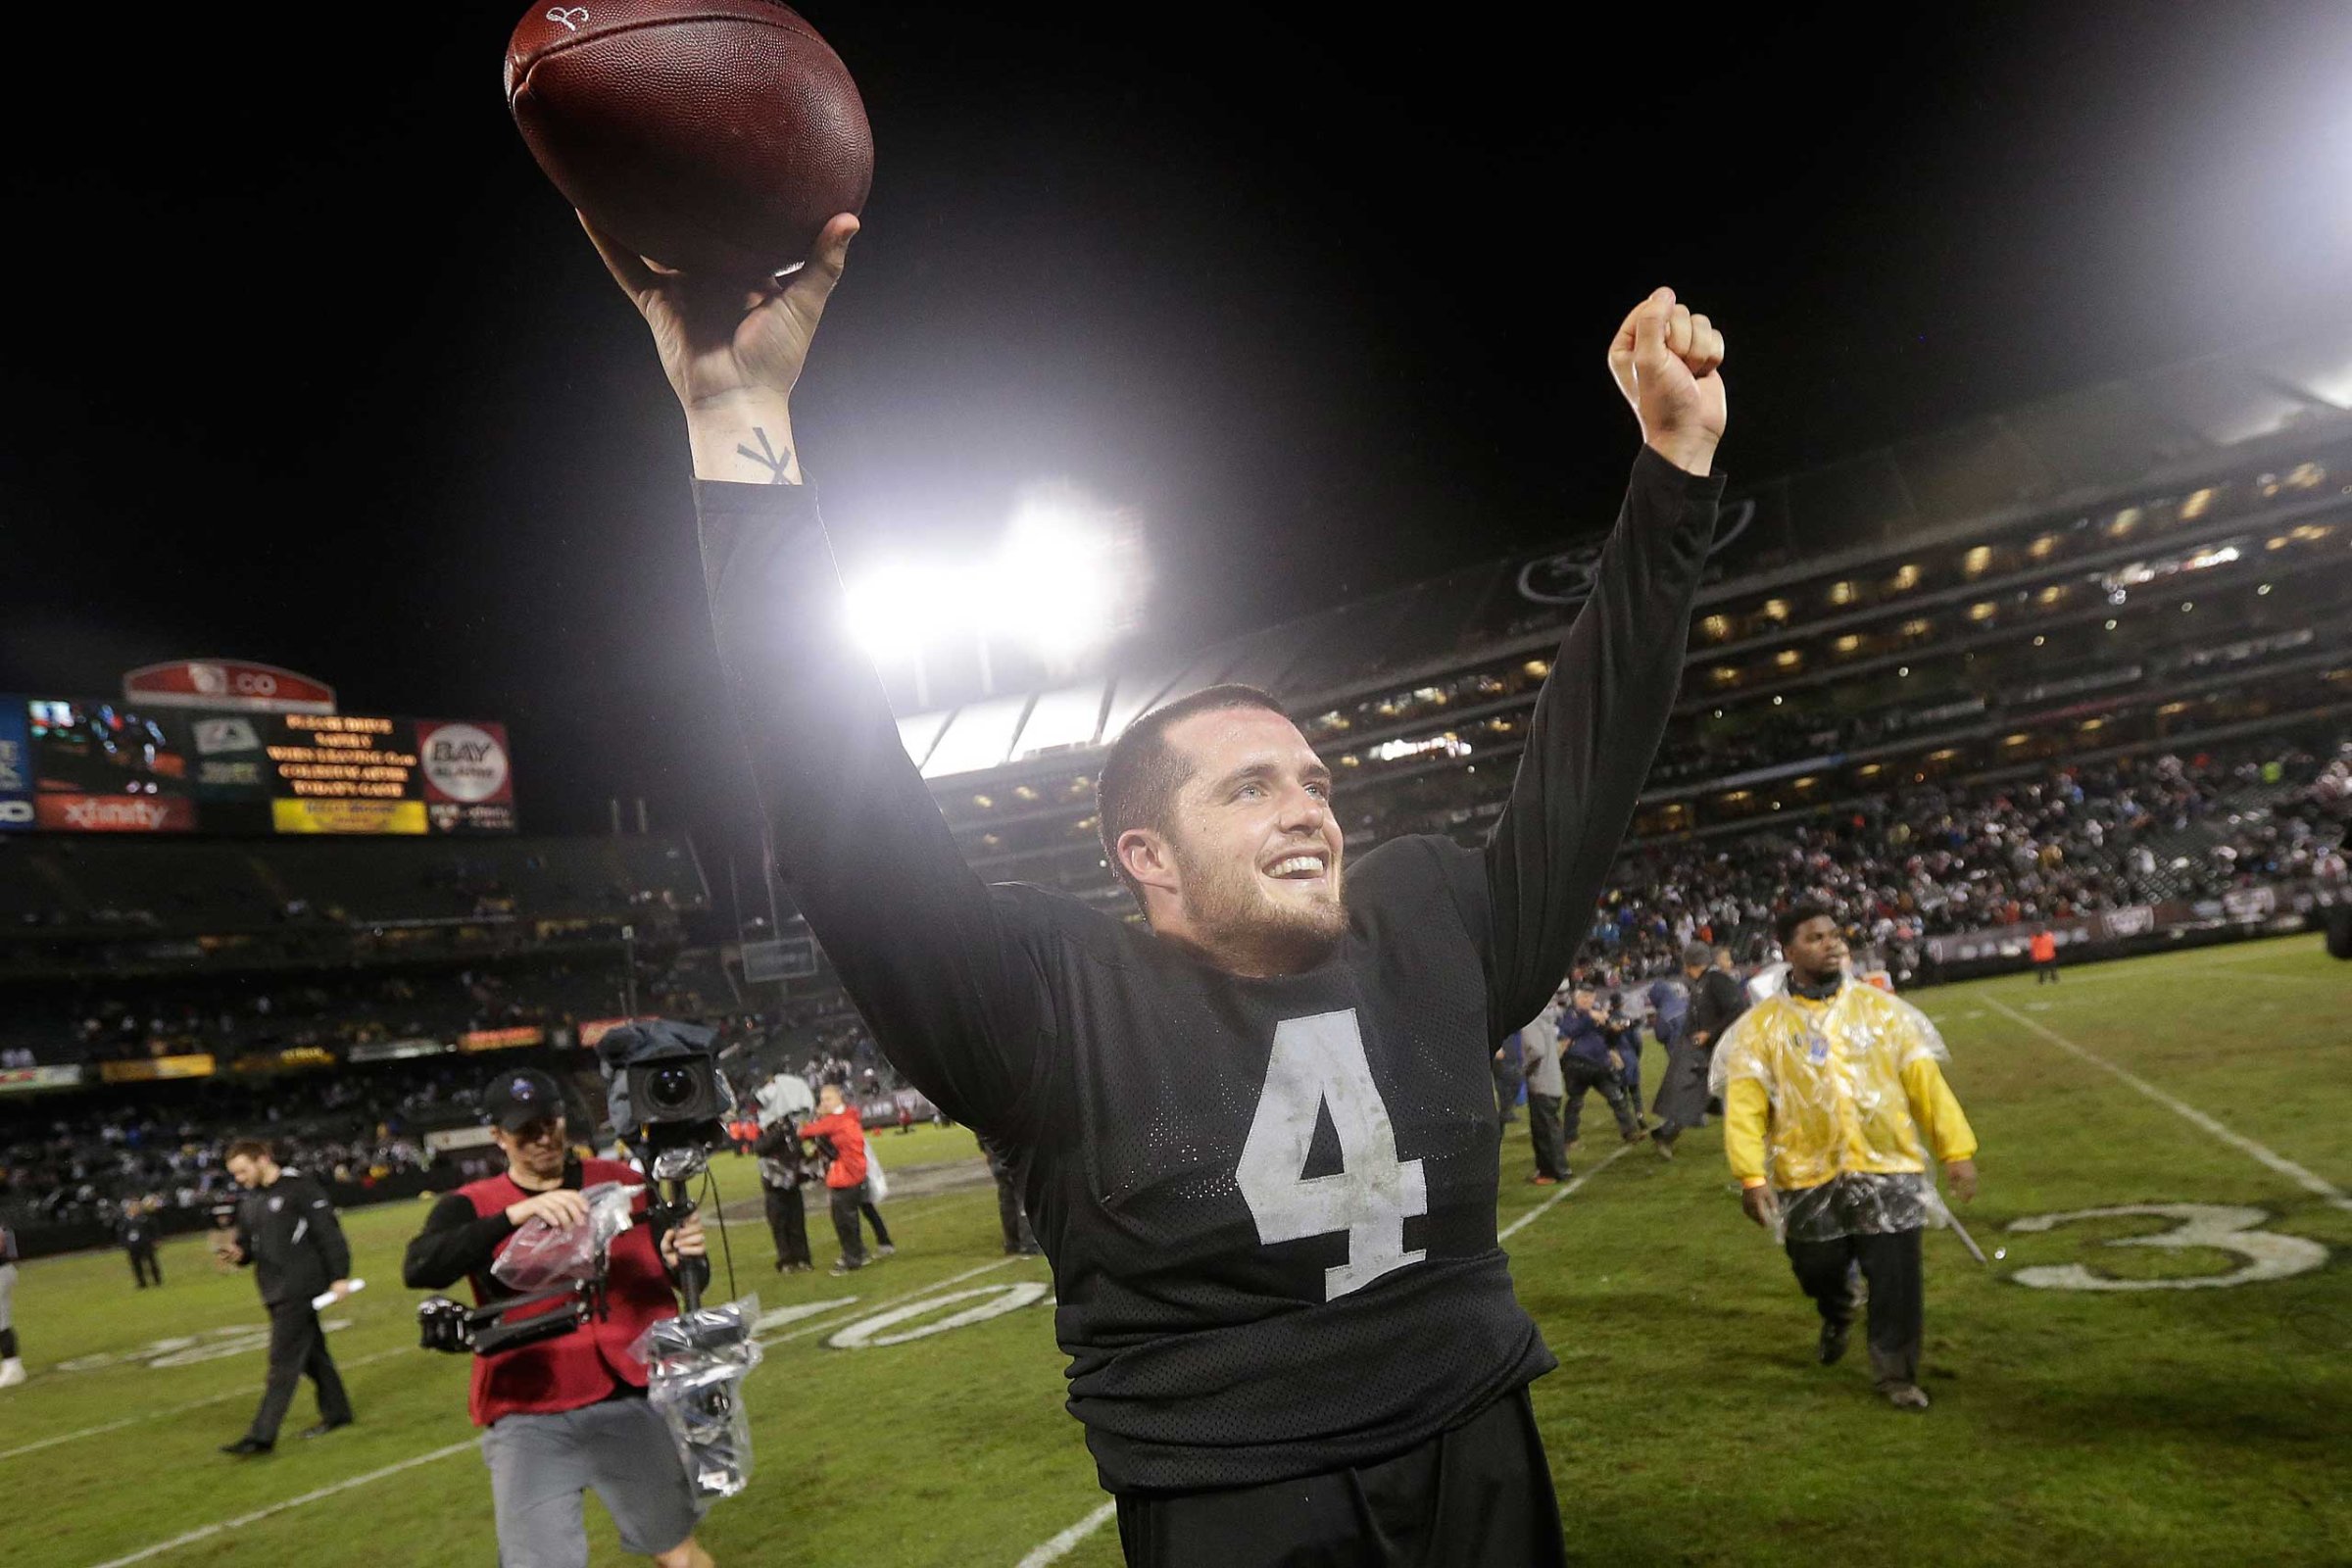 Oakland Raiders quarterback Derek Carr celebrates after the Raiders defeated the Kansas City Chiefs 24-20 in an NFL football game in Oakland, Calif., Nov. 20, 2014.